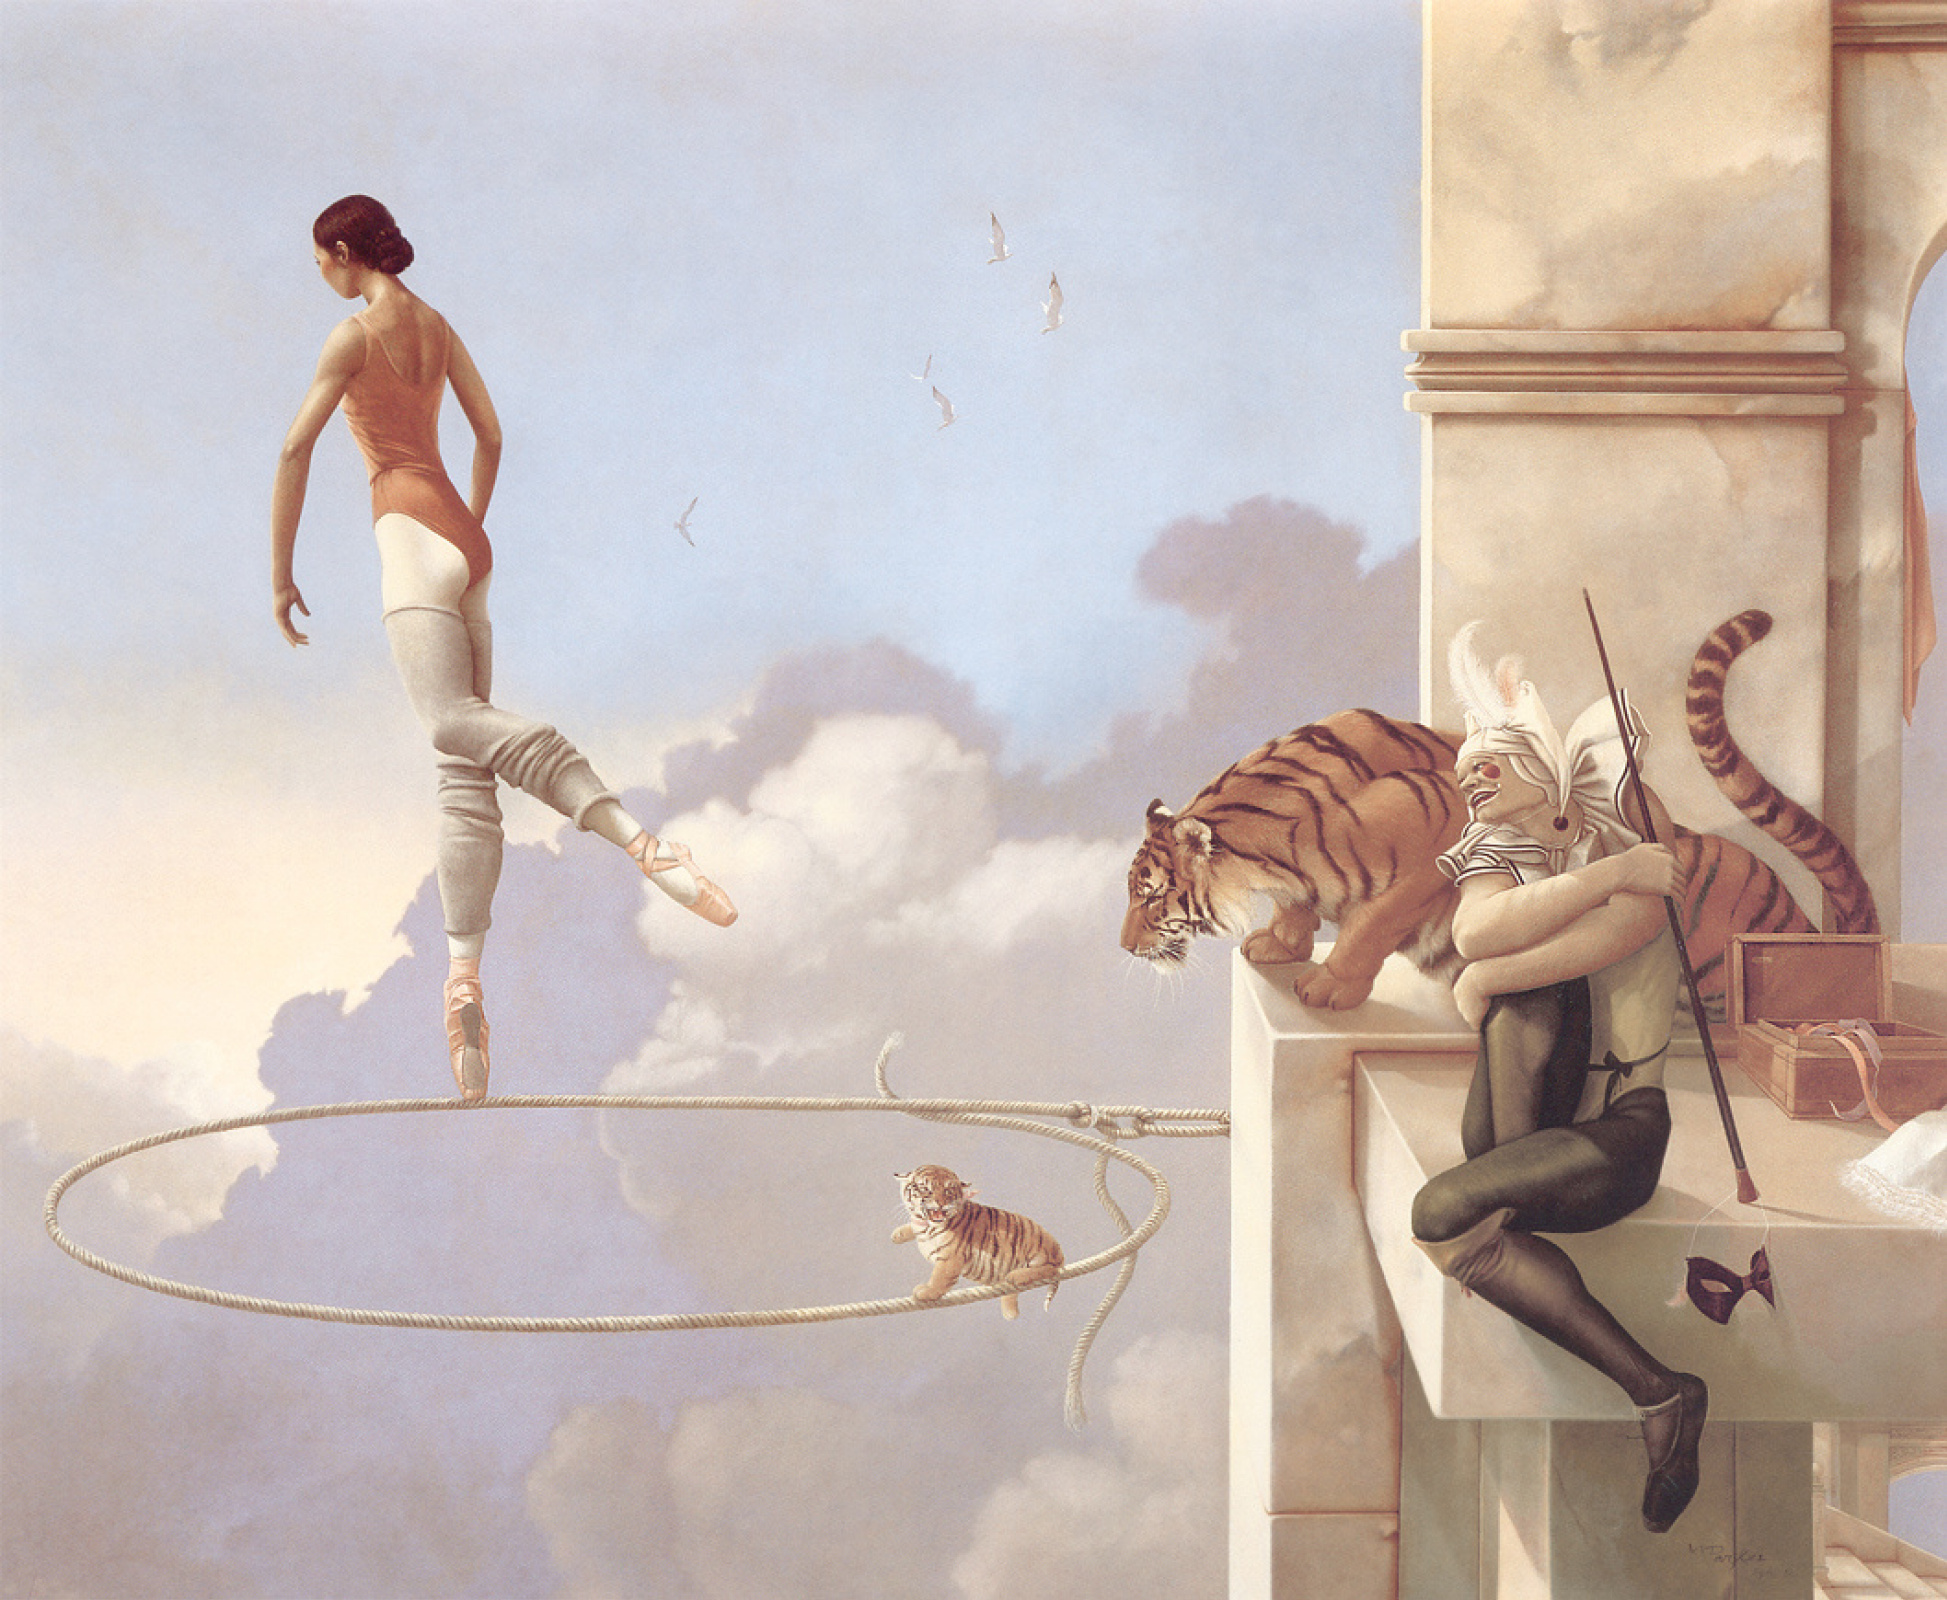 Dream roses by Michael Parkes: History, Analysis & Facts | Arthive